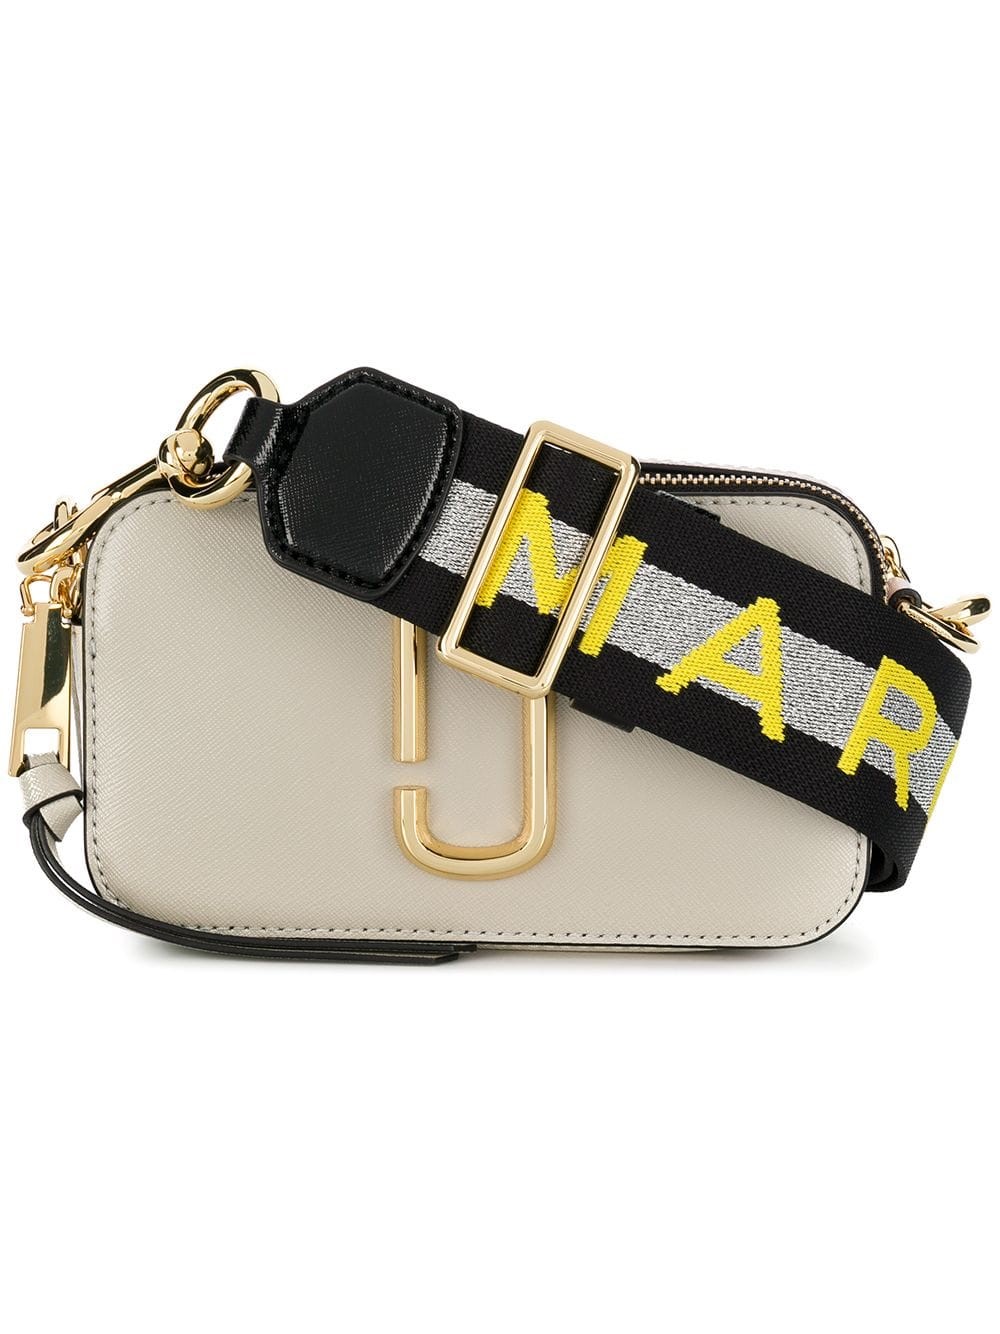 marc jacobs SNAPSHOT CROSS BODY BAG available on 0 - 25740